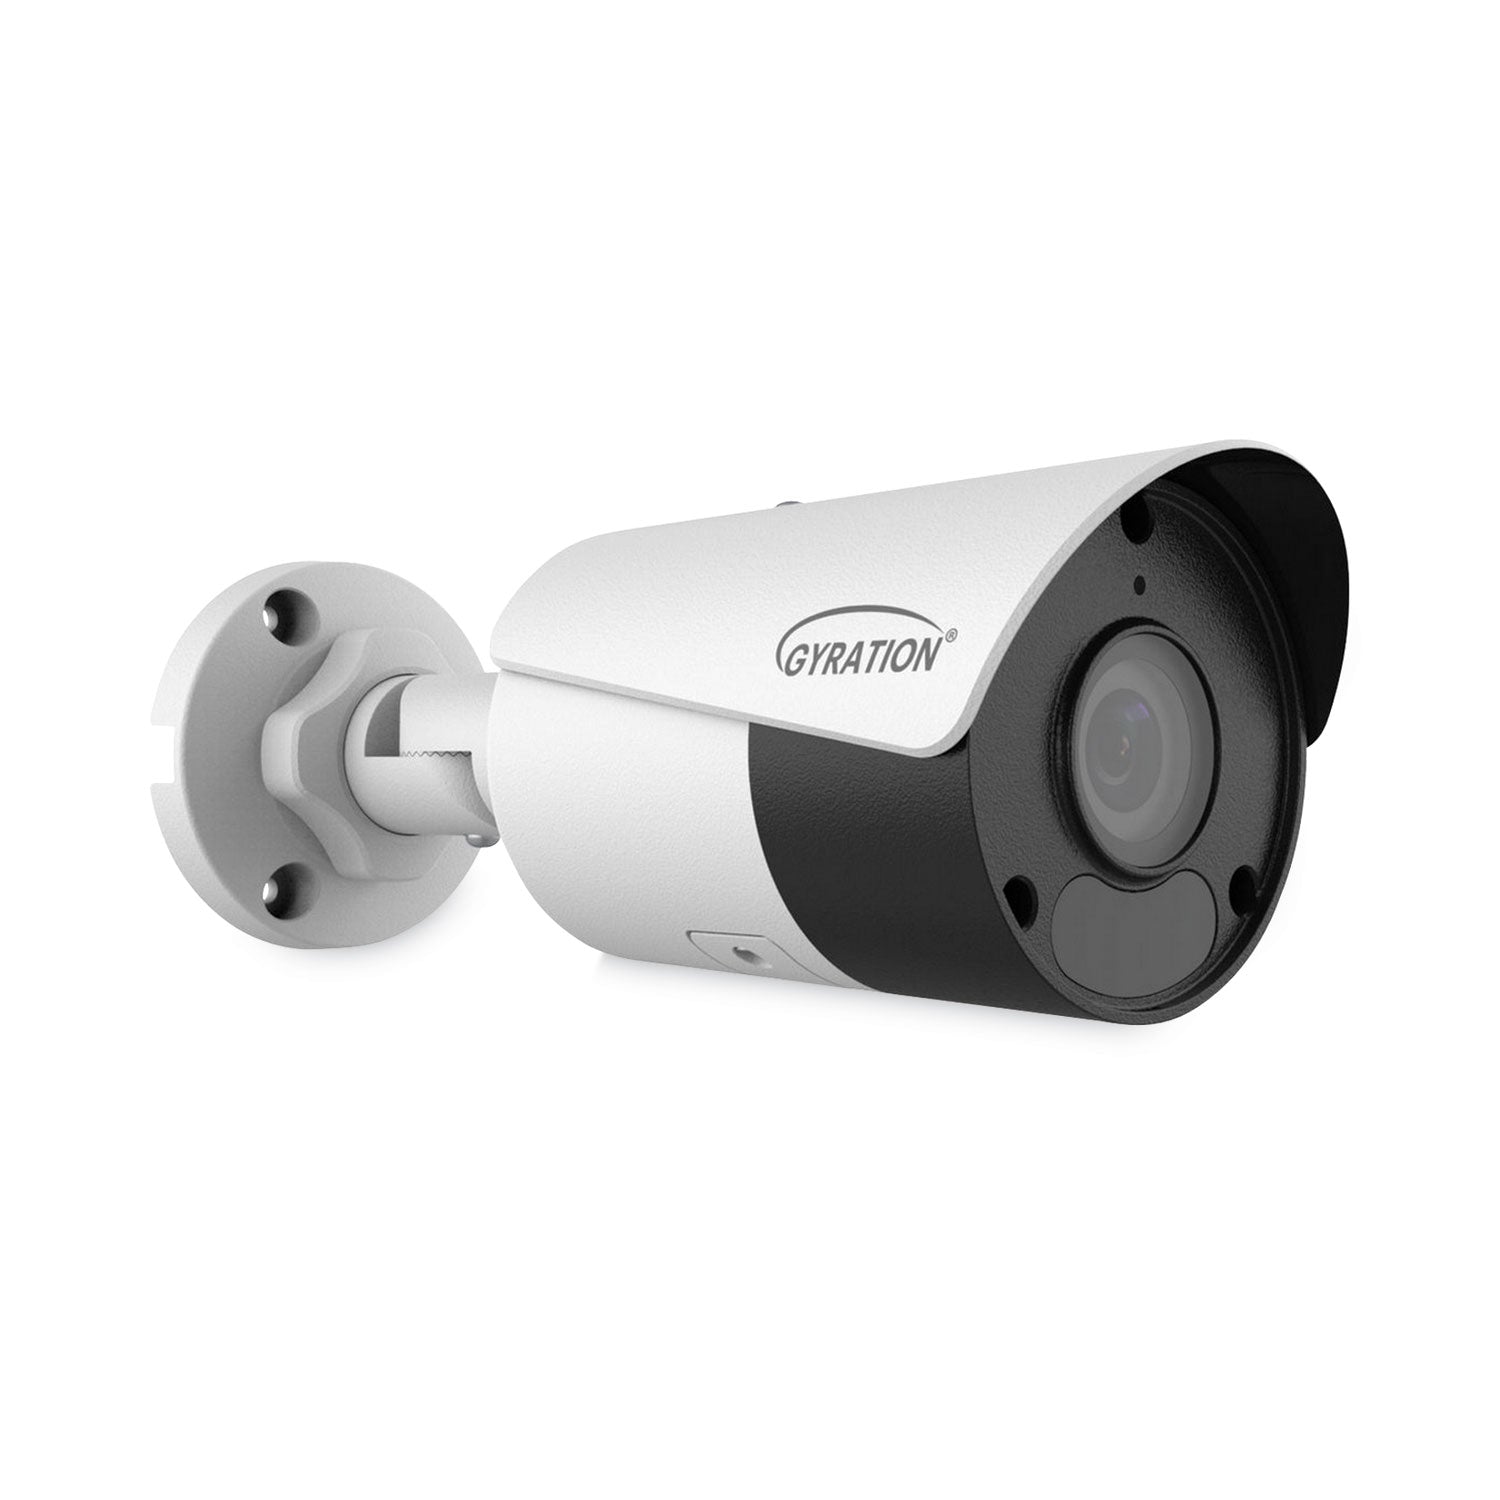 cyberview-400b-4-mp-outdoor-ir-fixed-bullet-camera_adecybrview400b - 2